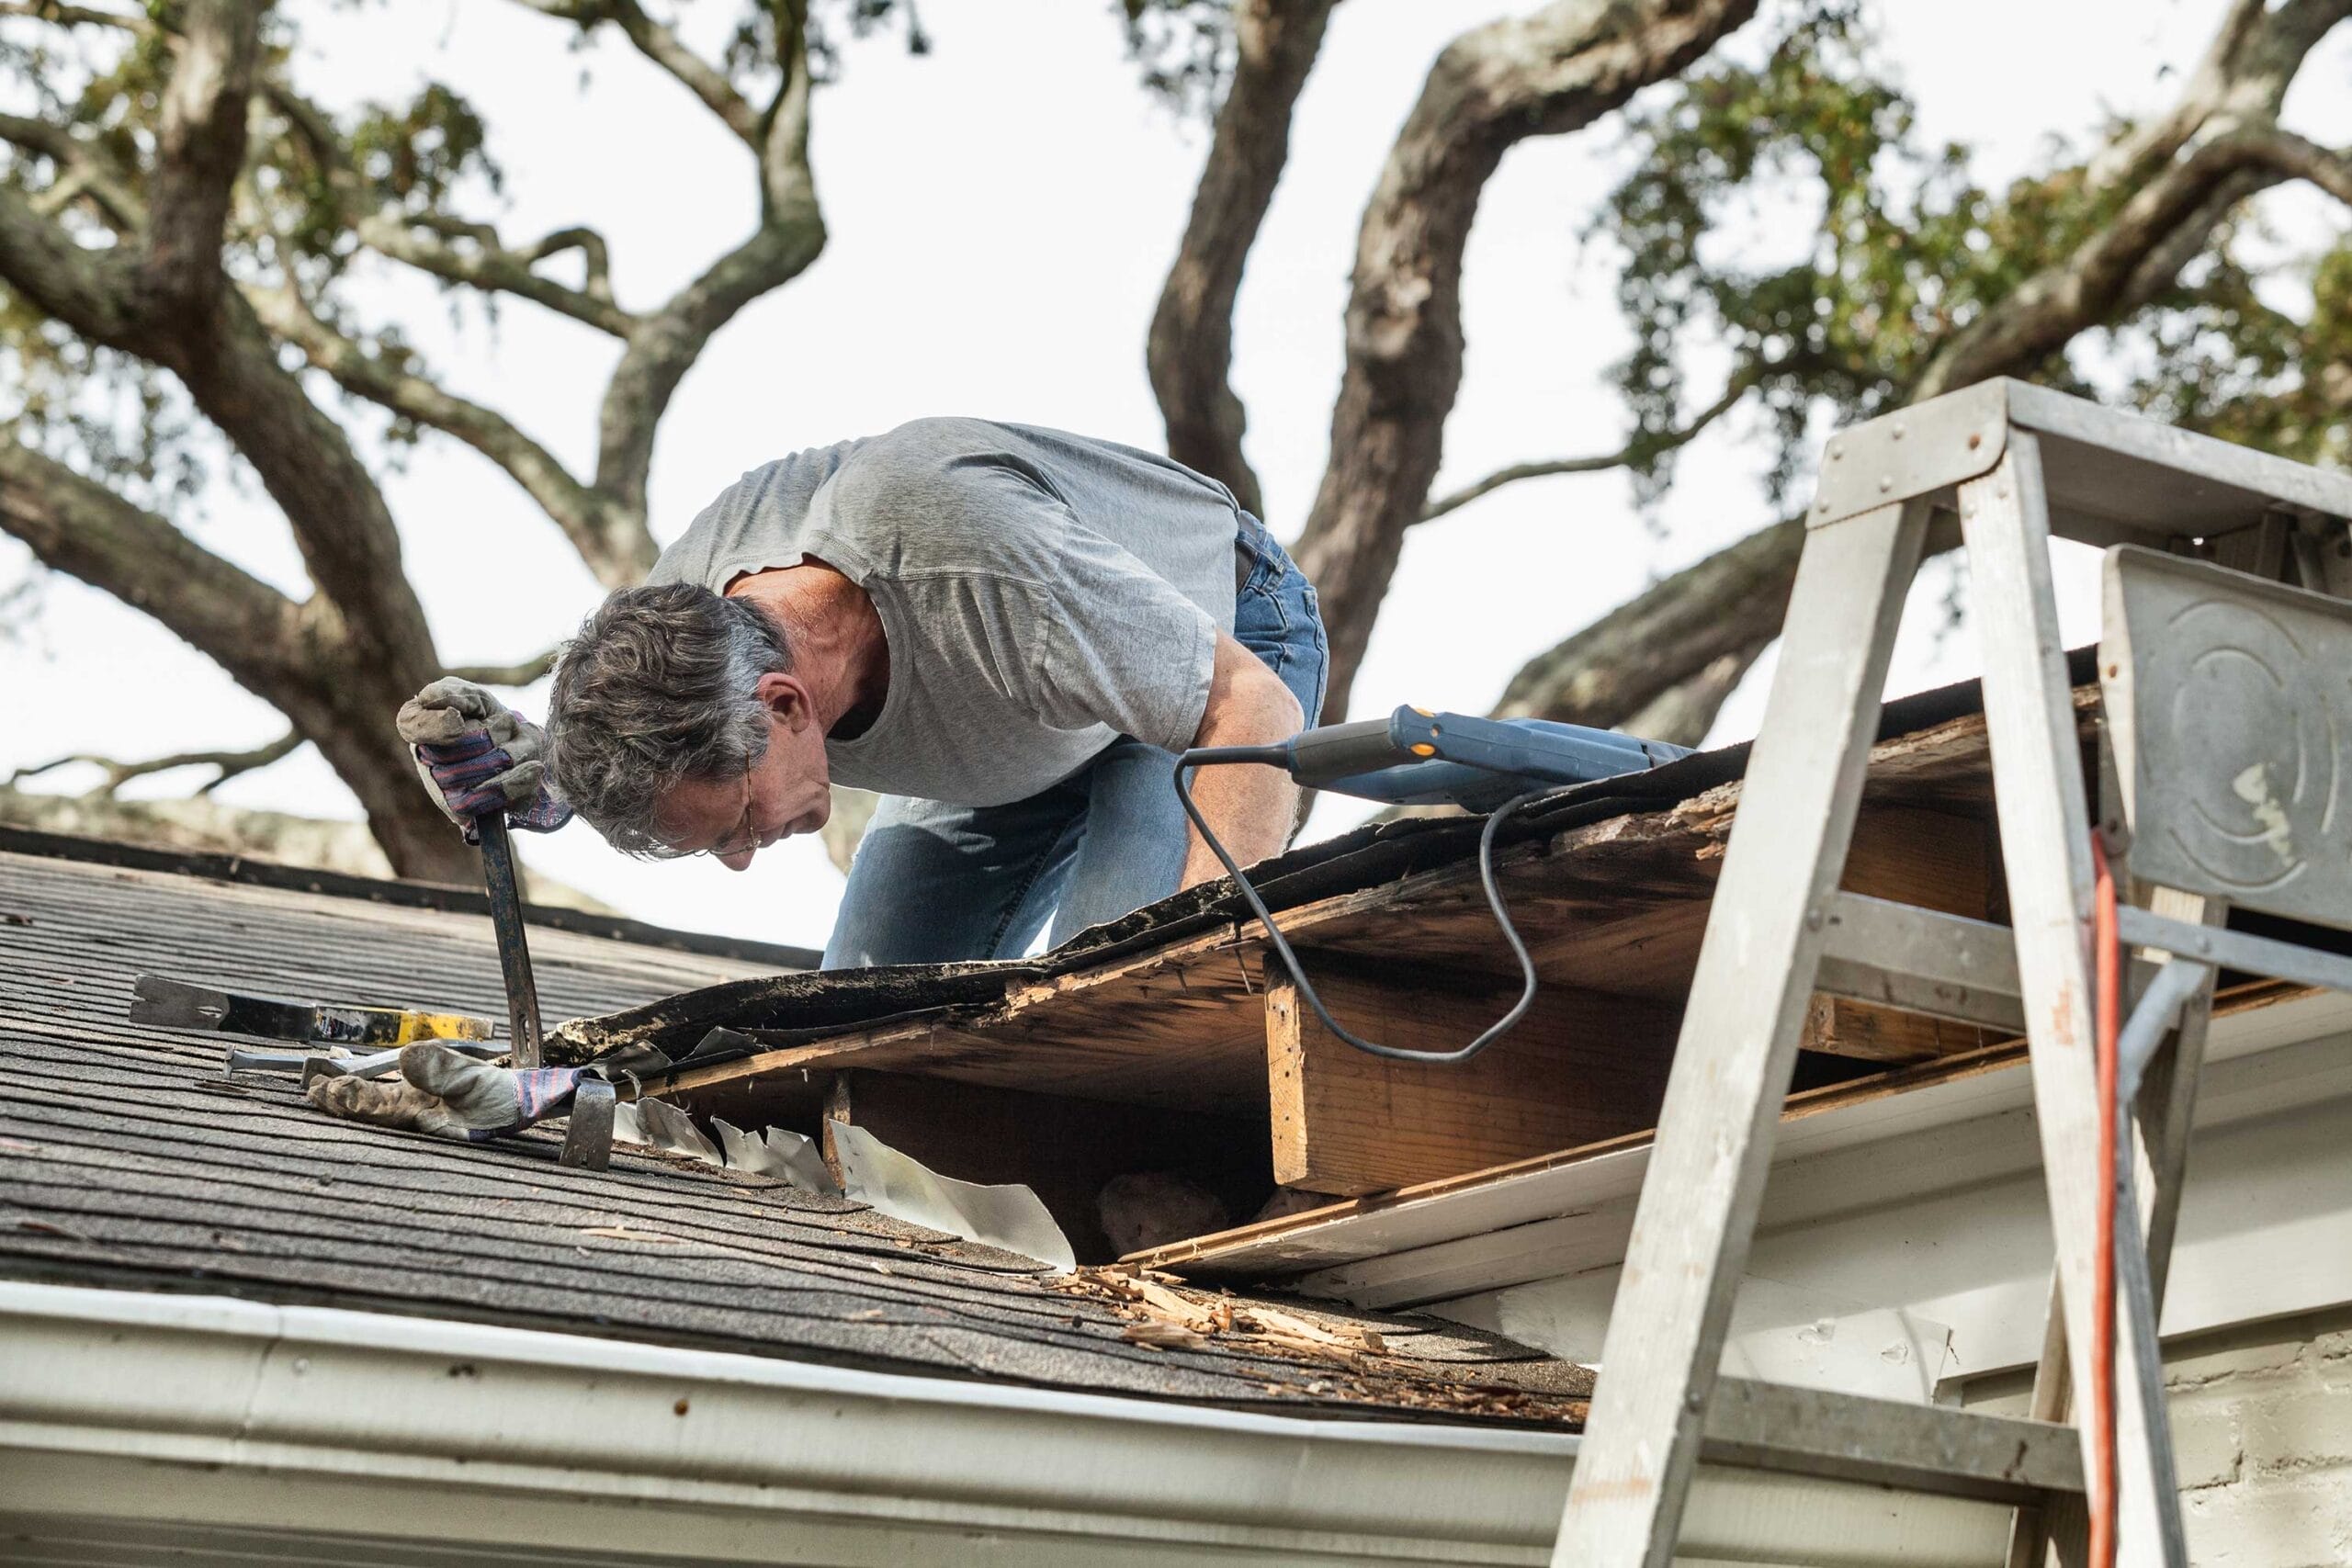 common causes of roof damage, roof damage causes, roof damage signs, Cape Coral